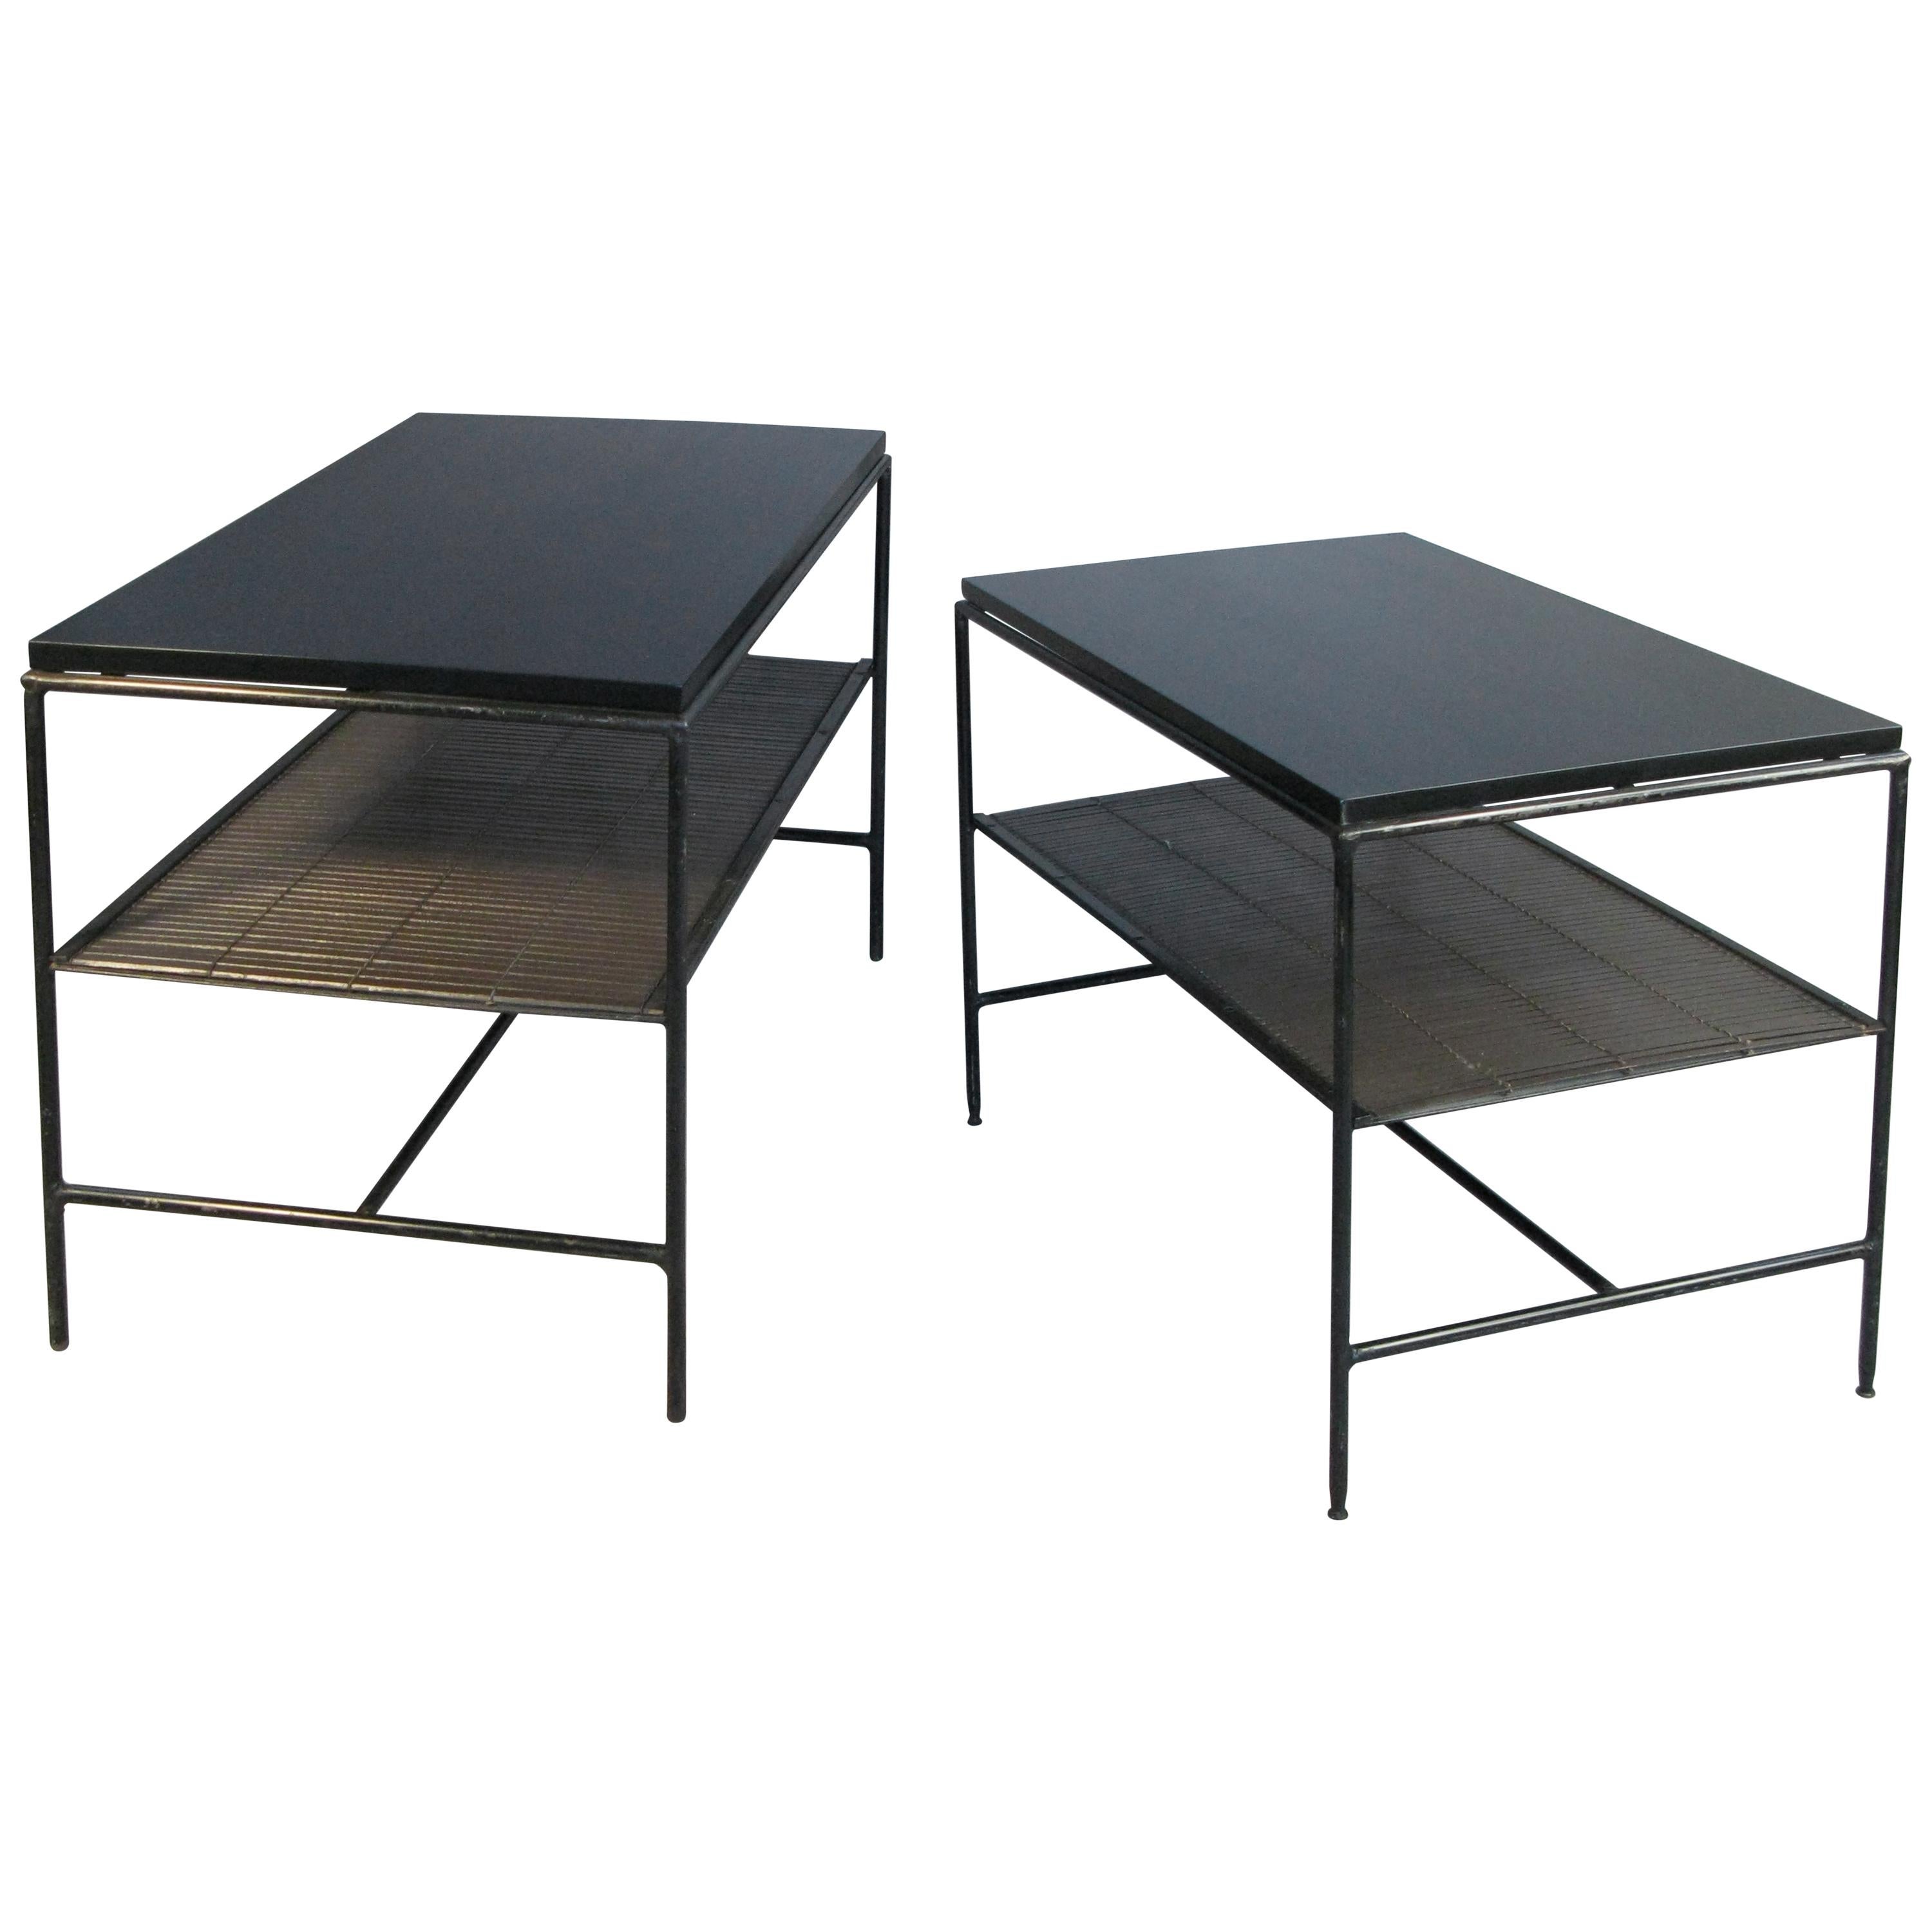 Pair of Iron and Ebonized Maple Tables or Nightstands by Paul McCobb